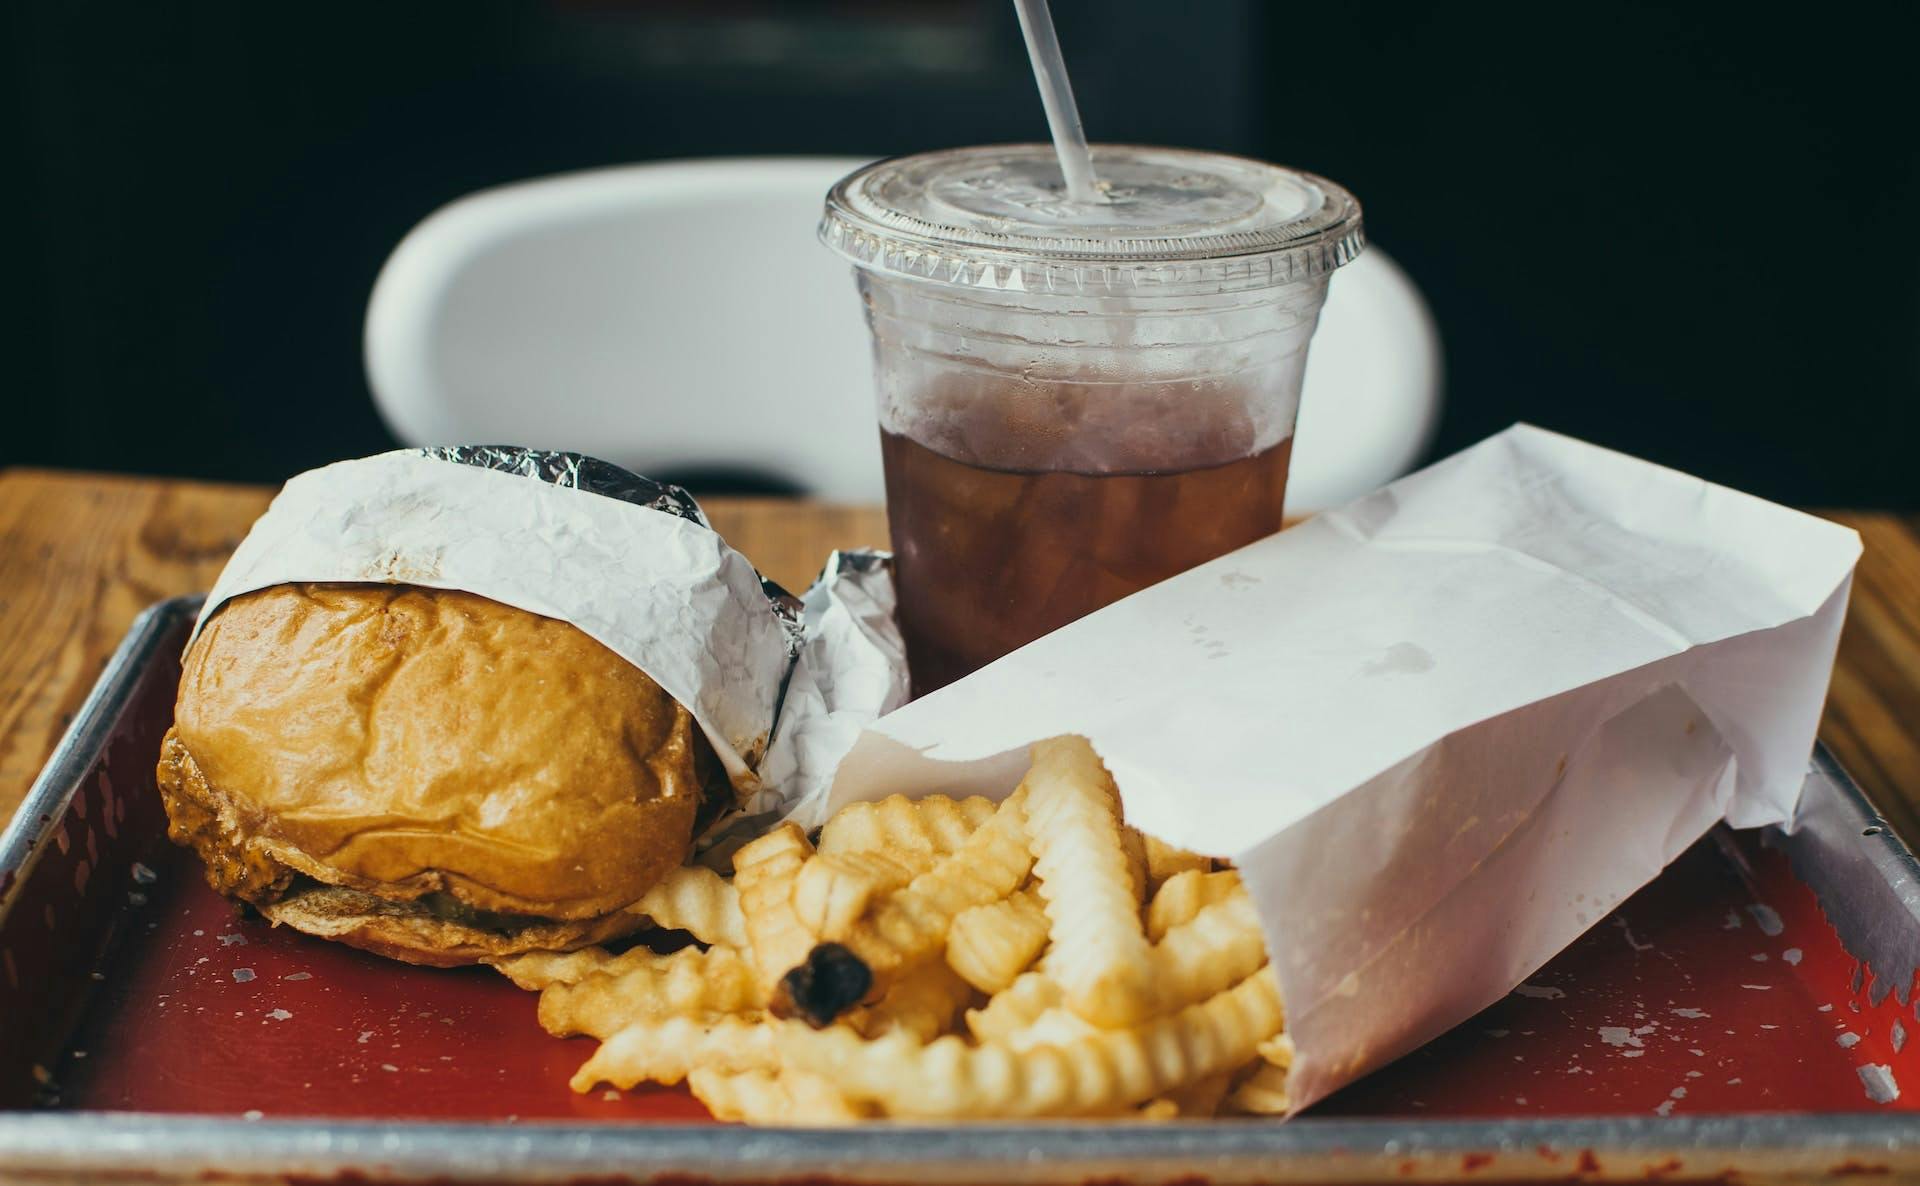 burger, fries, and soda on a tray